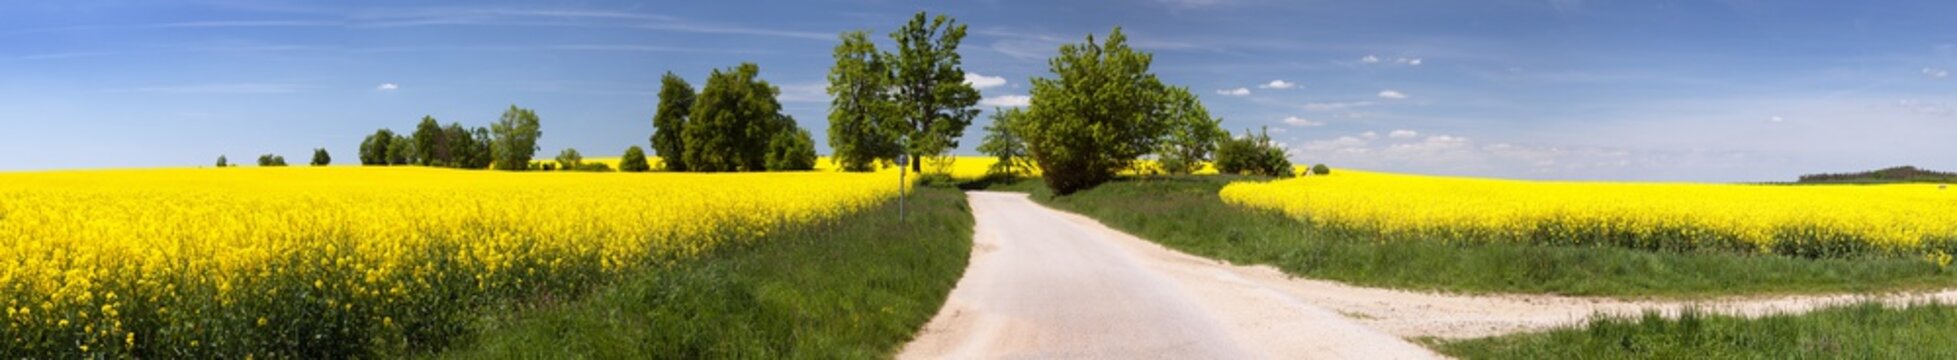 field of rapeseed with rural road